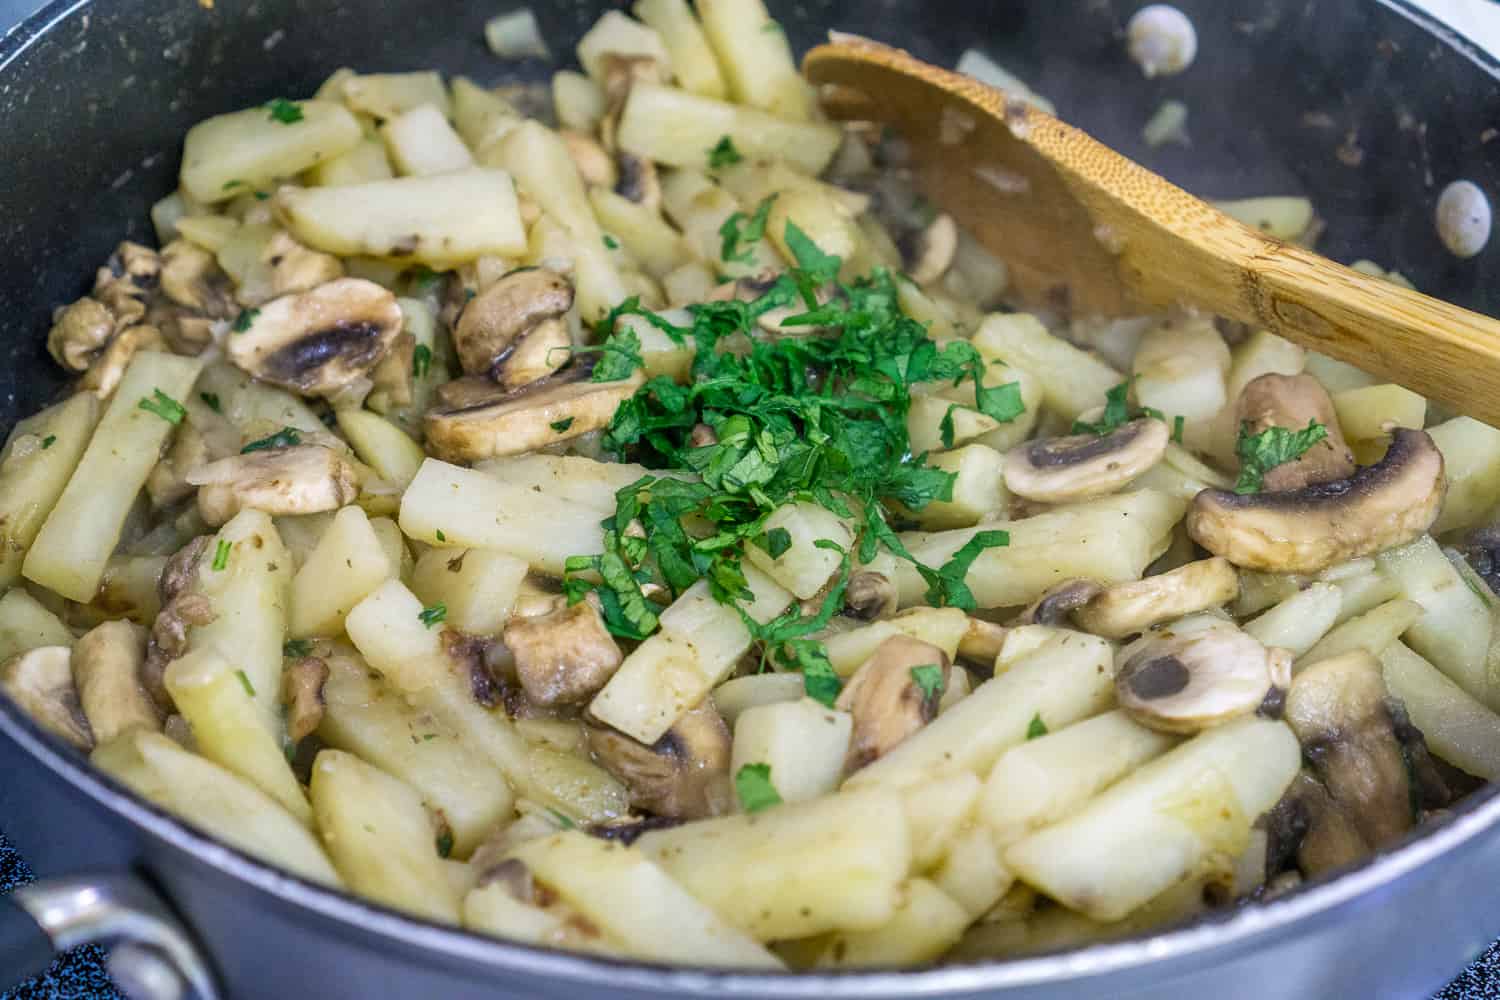 image of potatoes and mushrooms in skillet